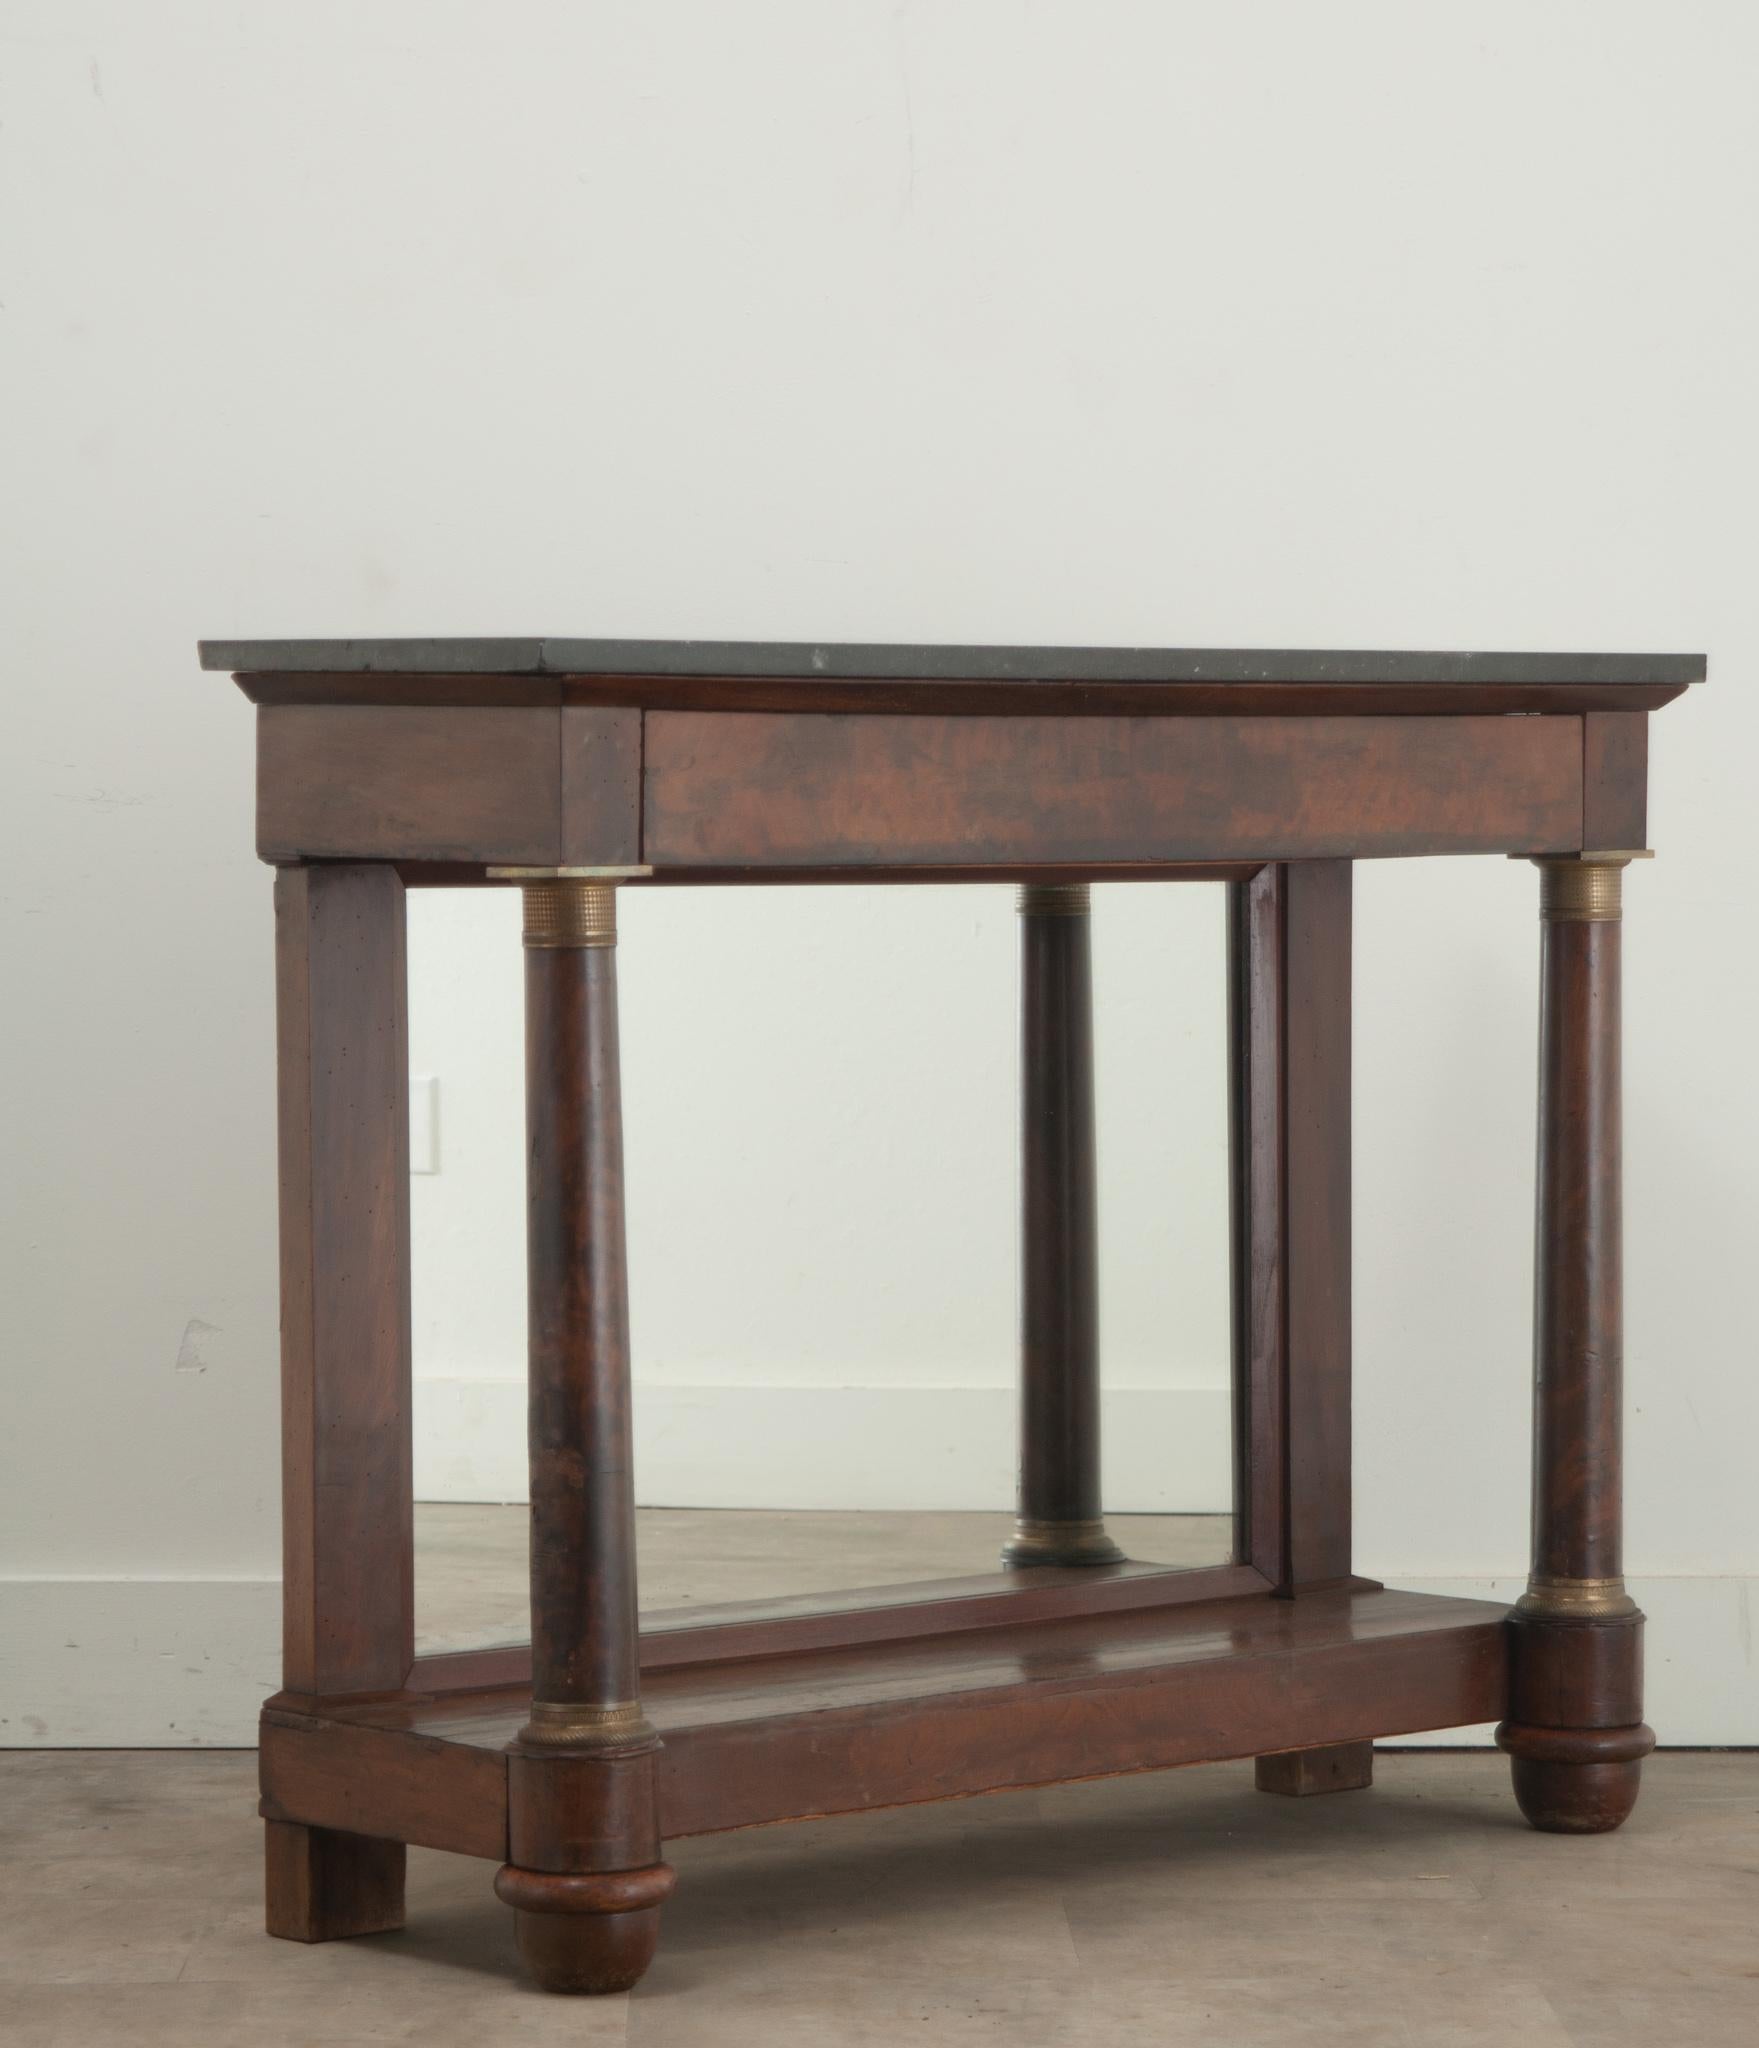 A classic French Empire mahogany console from the 19th Century. The original black fossil marble top is filled with shells and other petrified sea life. The simple apron contains one drawer and is supported by turned column front legs accented with